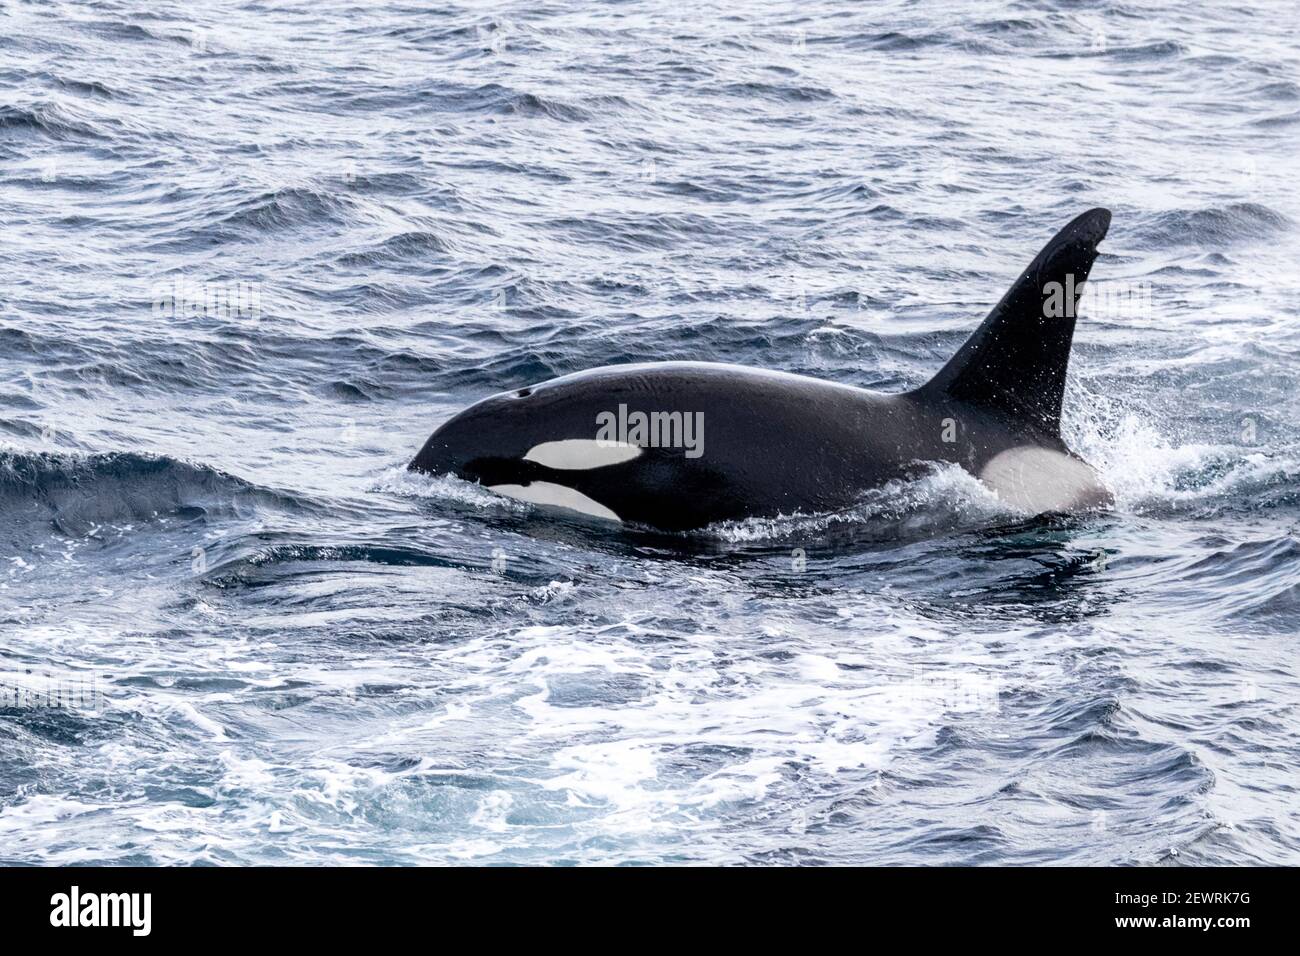 Adult bull killer whale (Orcinus orca), power-lunging while feeding on fish along the coast of eastern Greenland, Polar Regions Stock Photo